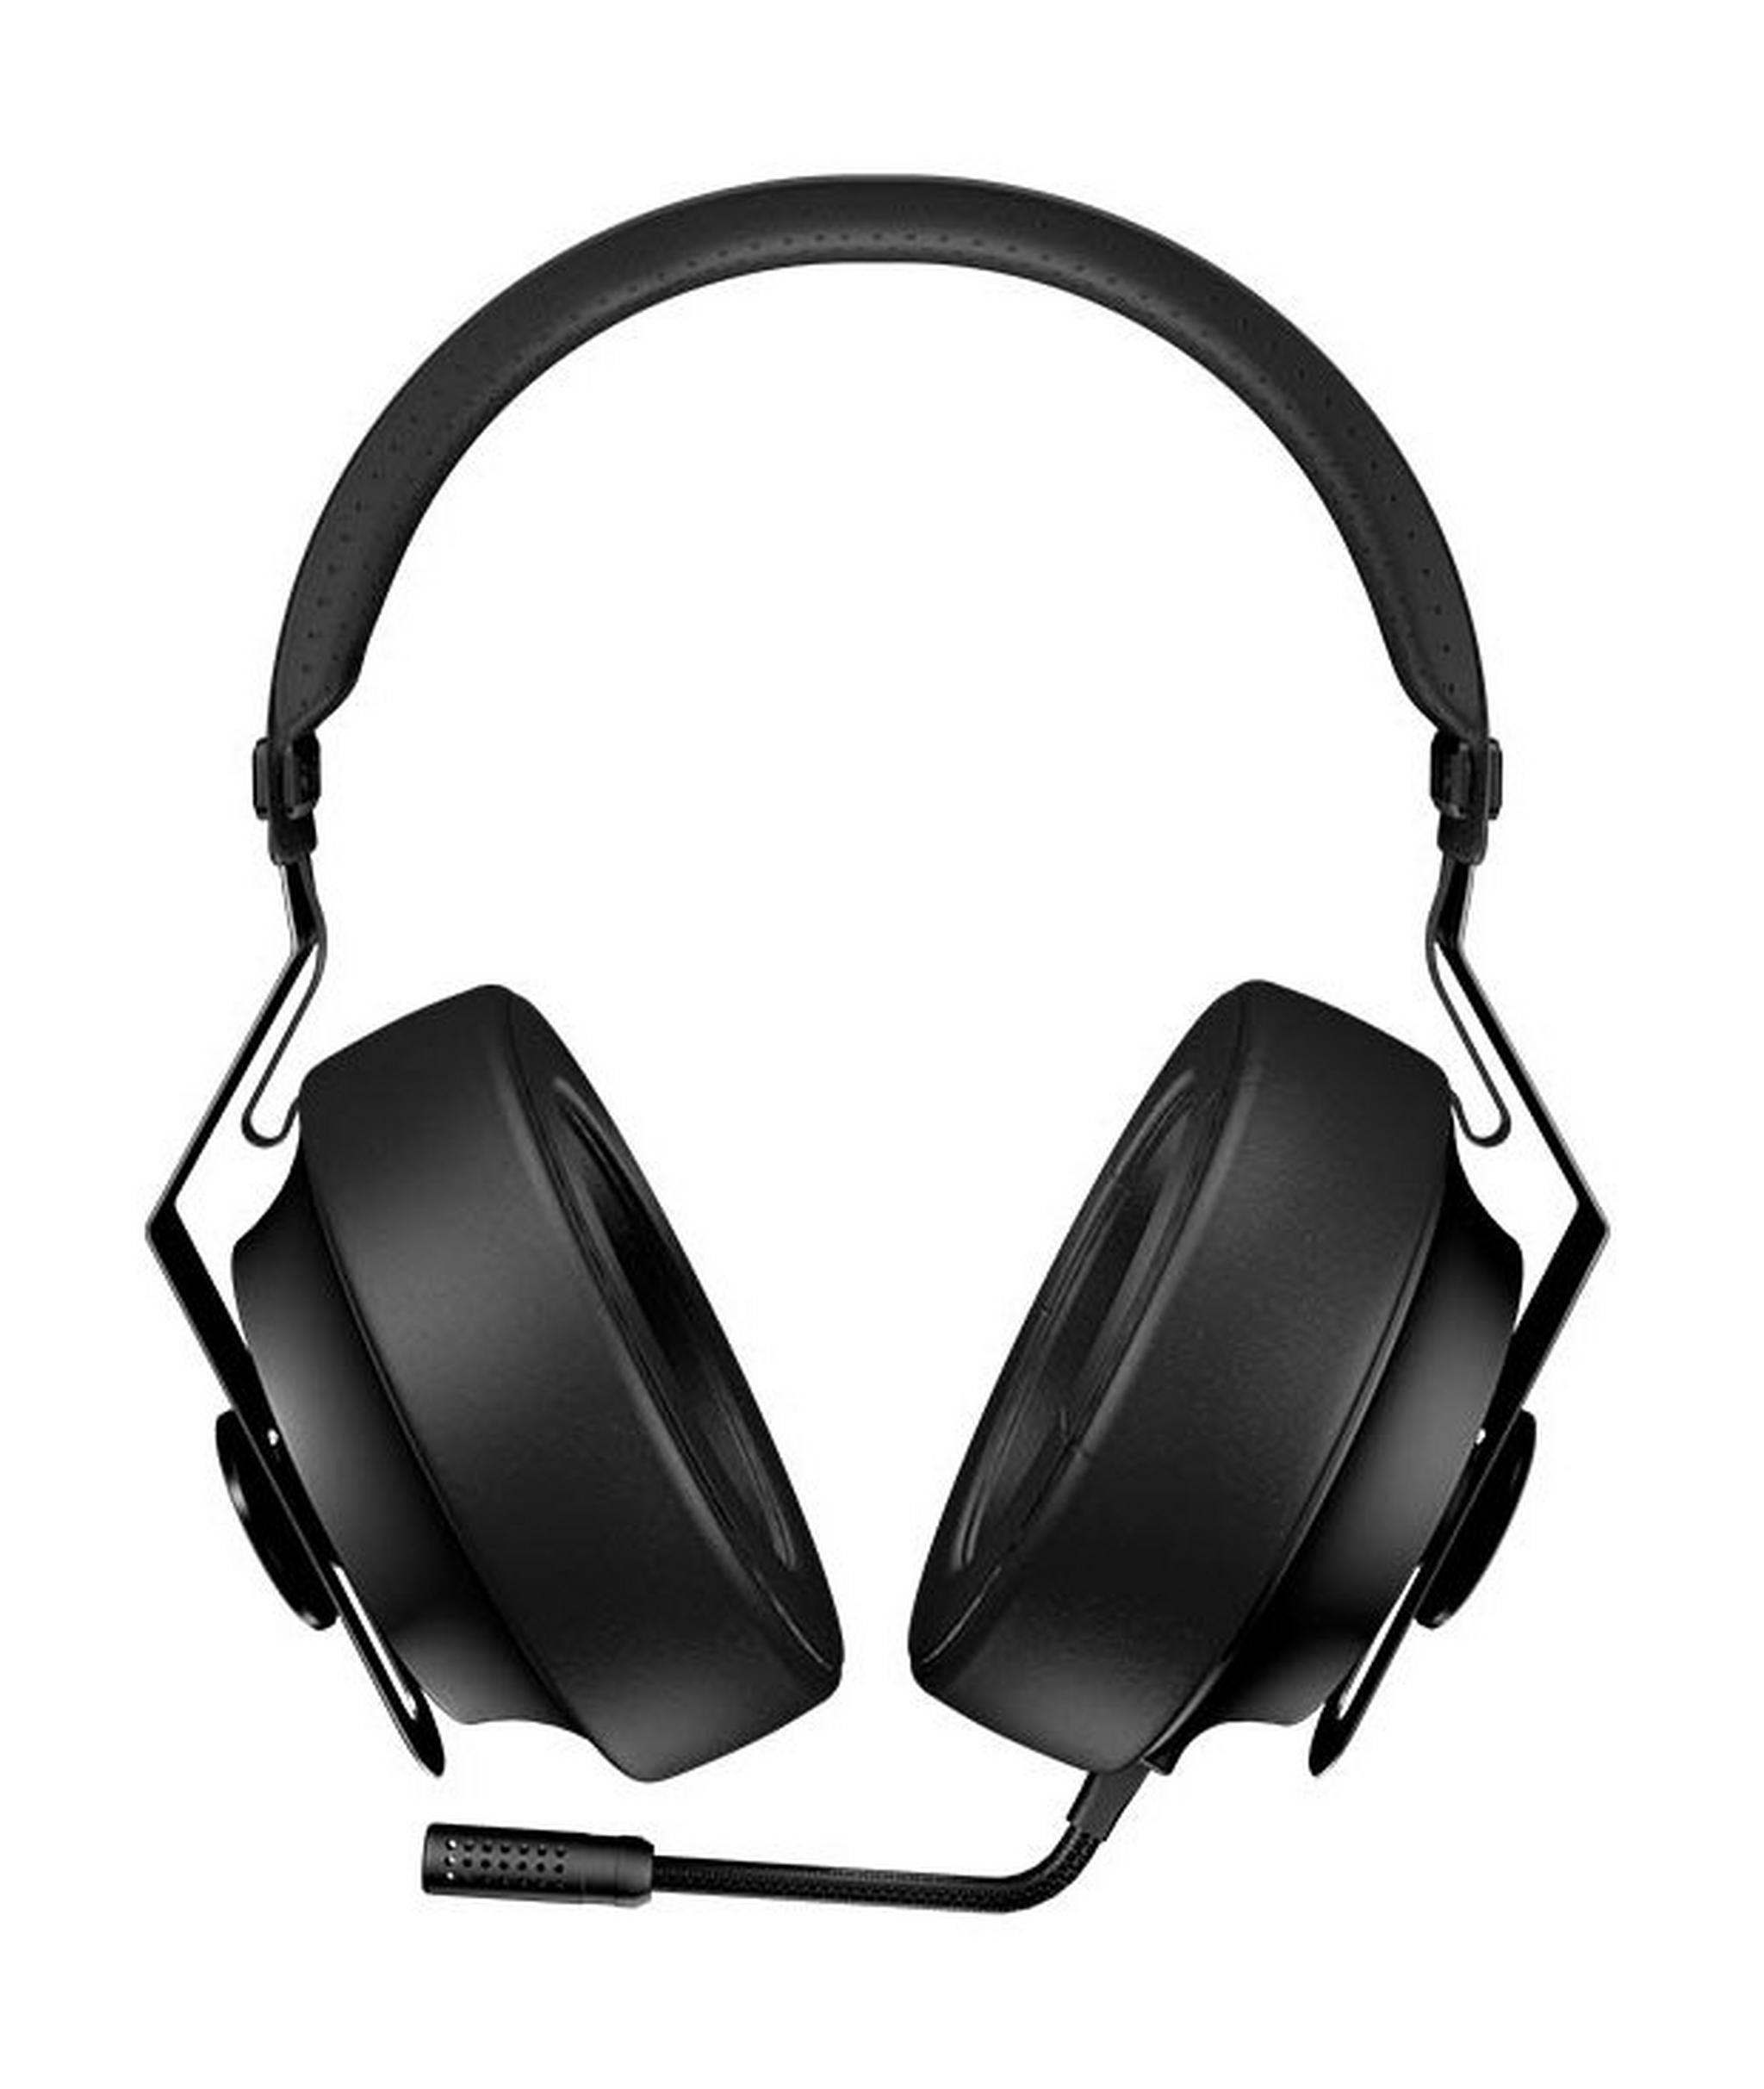 Cougar Phontum Essential Wired Stereo Gaming Headset - Black